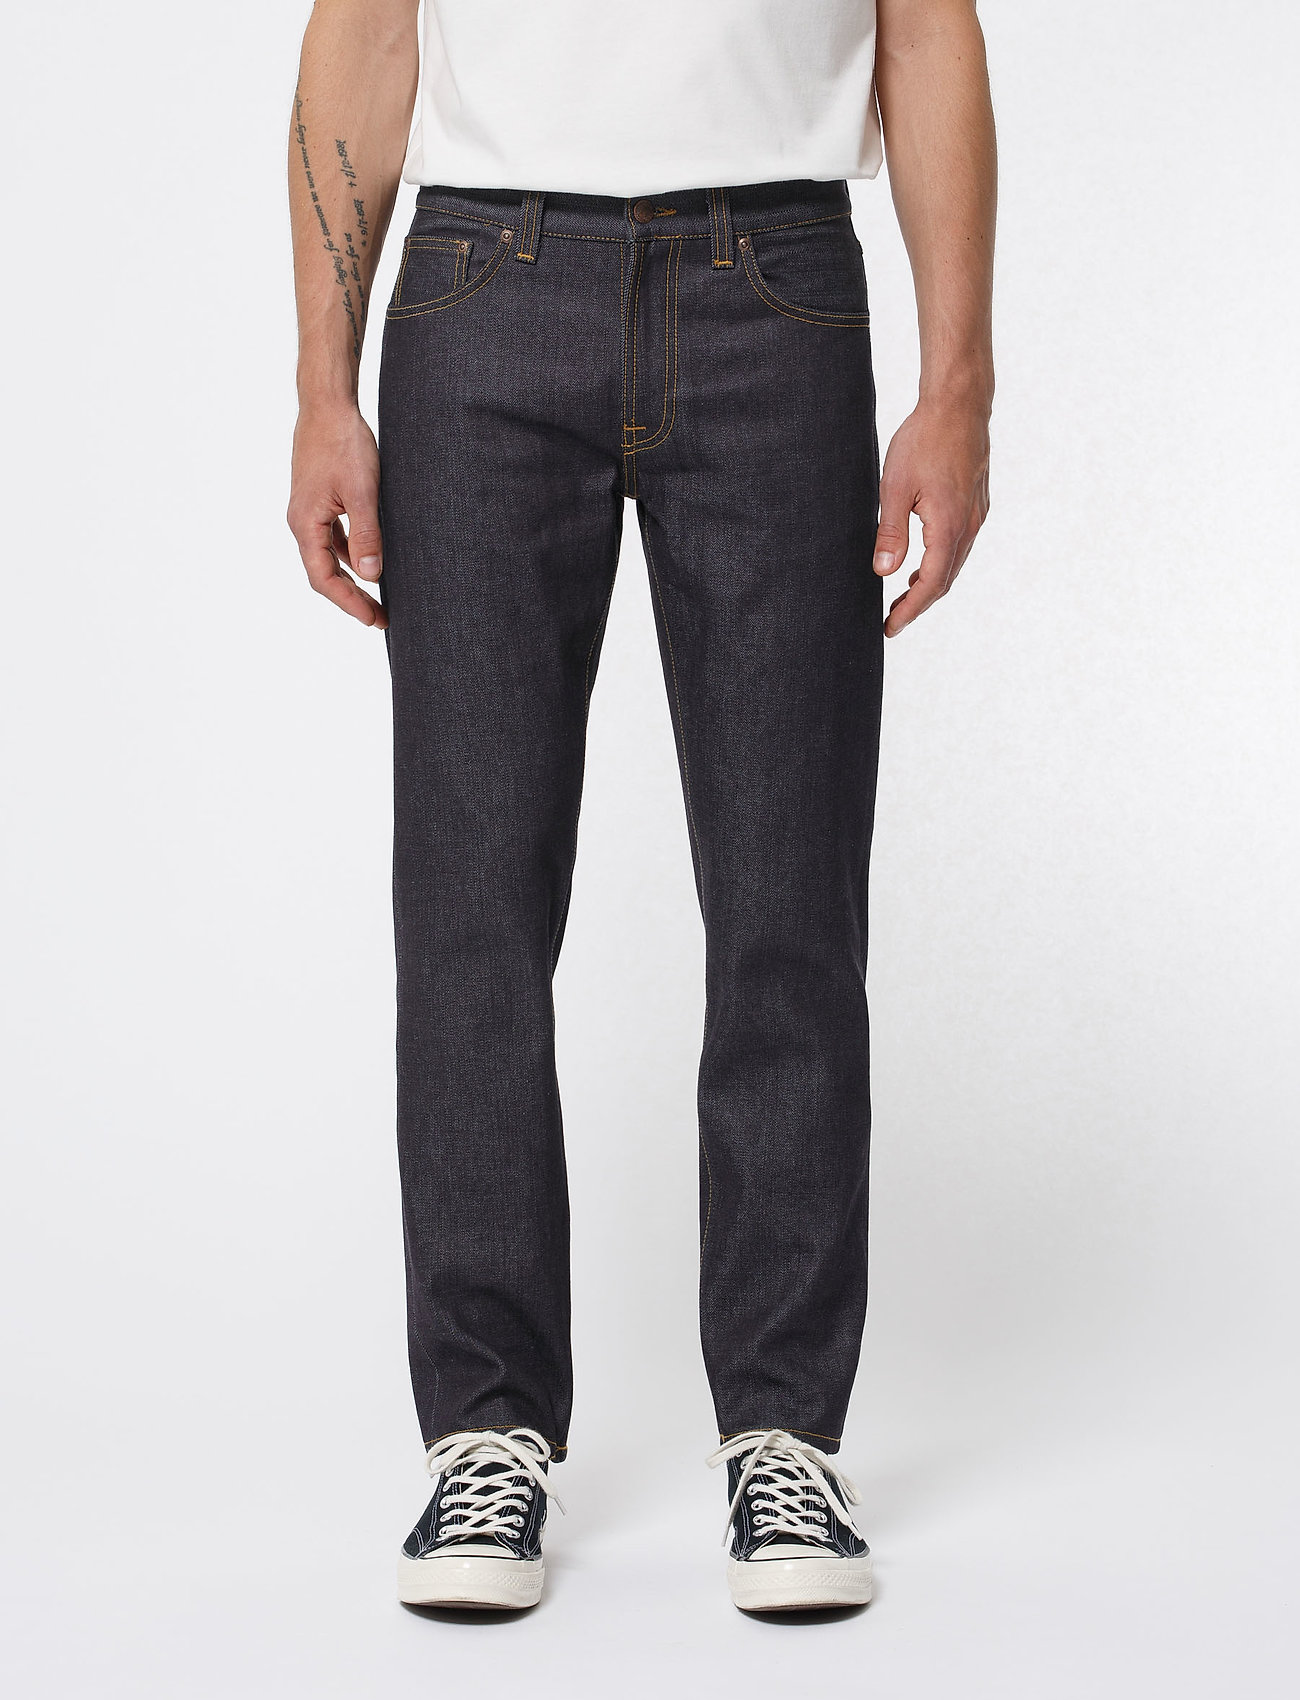 Nudie Jeans - Gritty Jackson - regular jeans - dry classic navy - 0